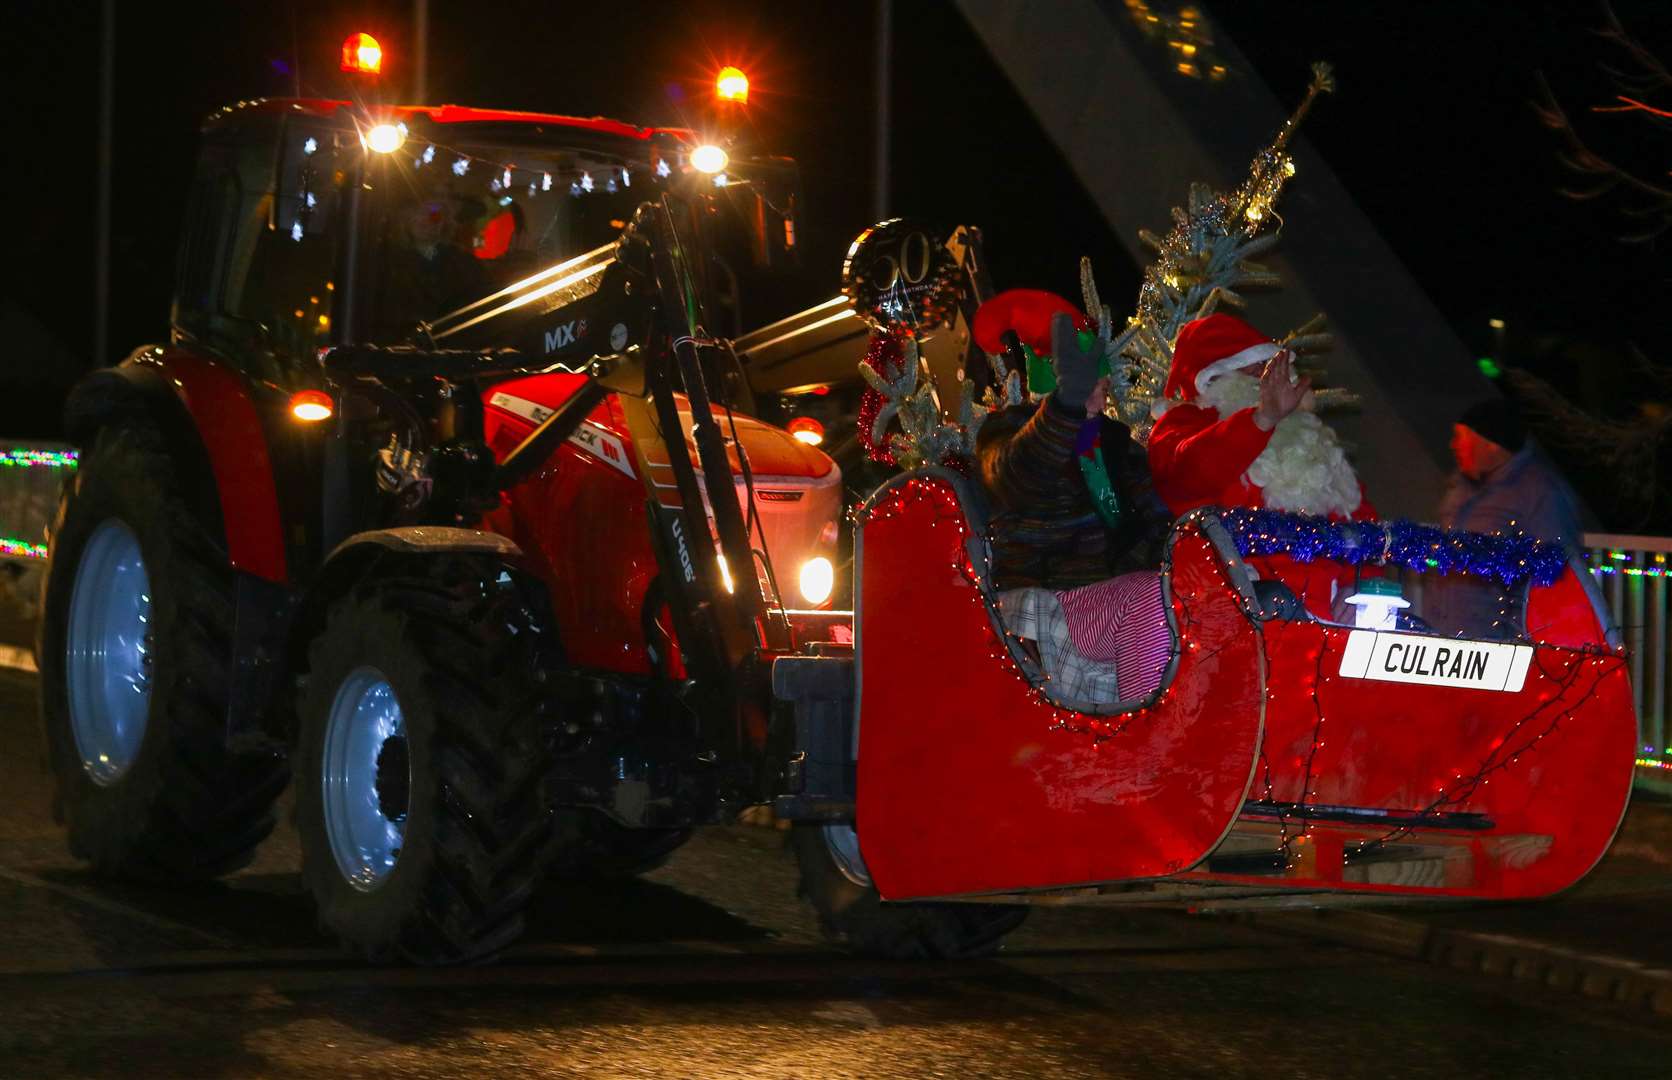 The prize for best decorated tractor went to Robert and Anne Henderson of Culrain Mains.